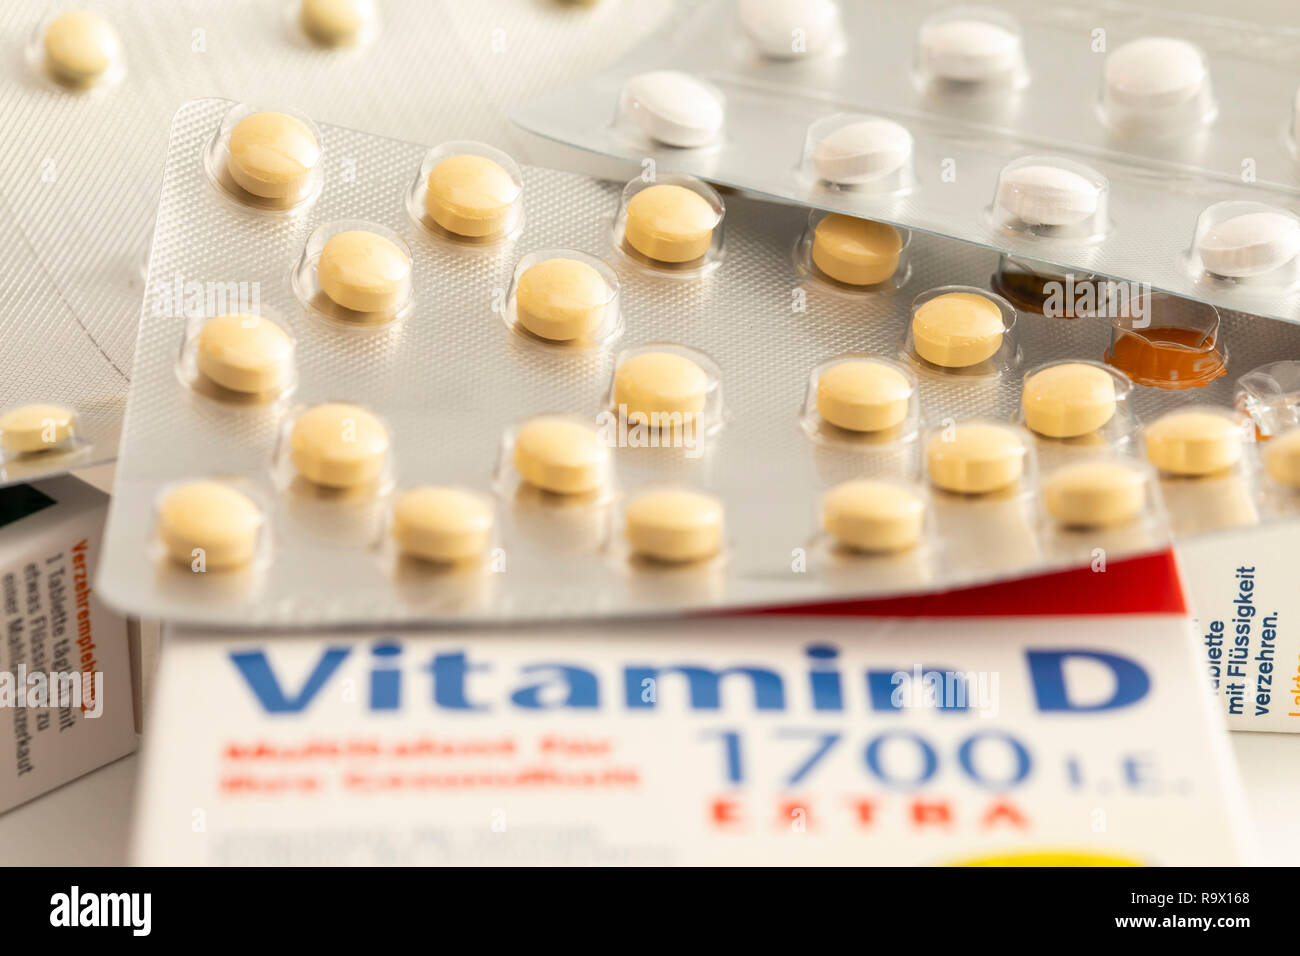 Vitamin D Tablets Packs The Preparation Is Intended To